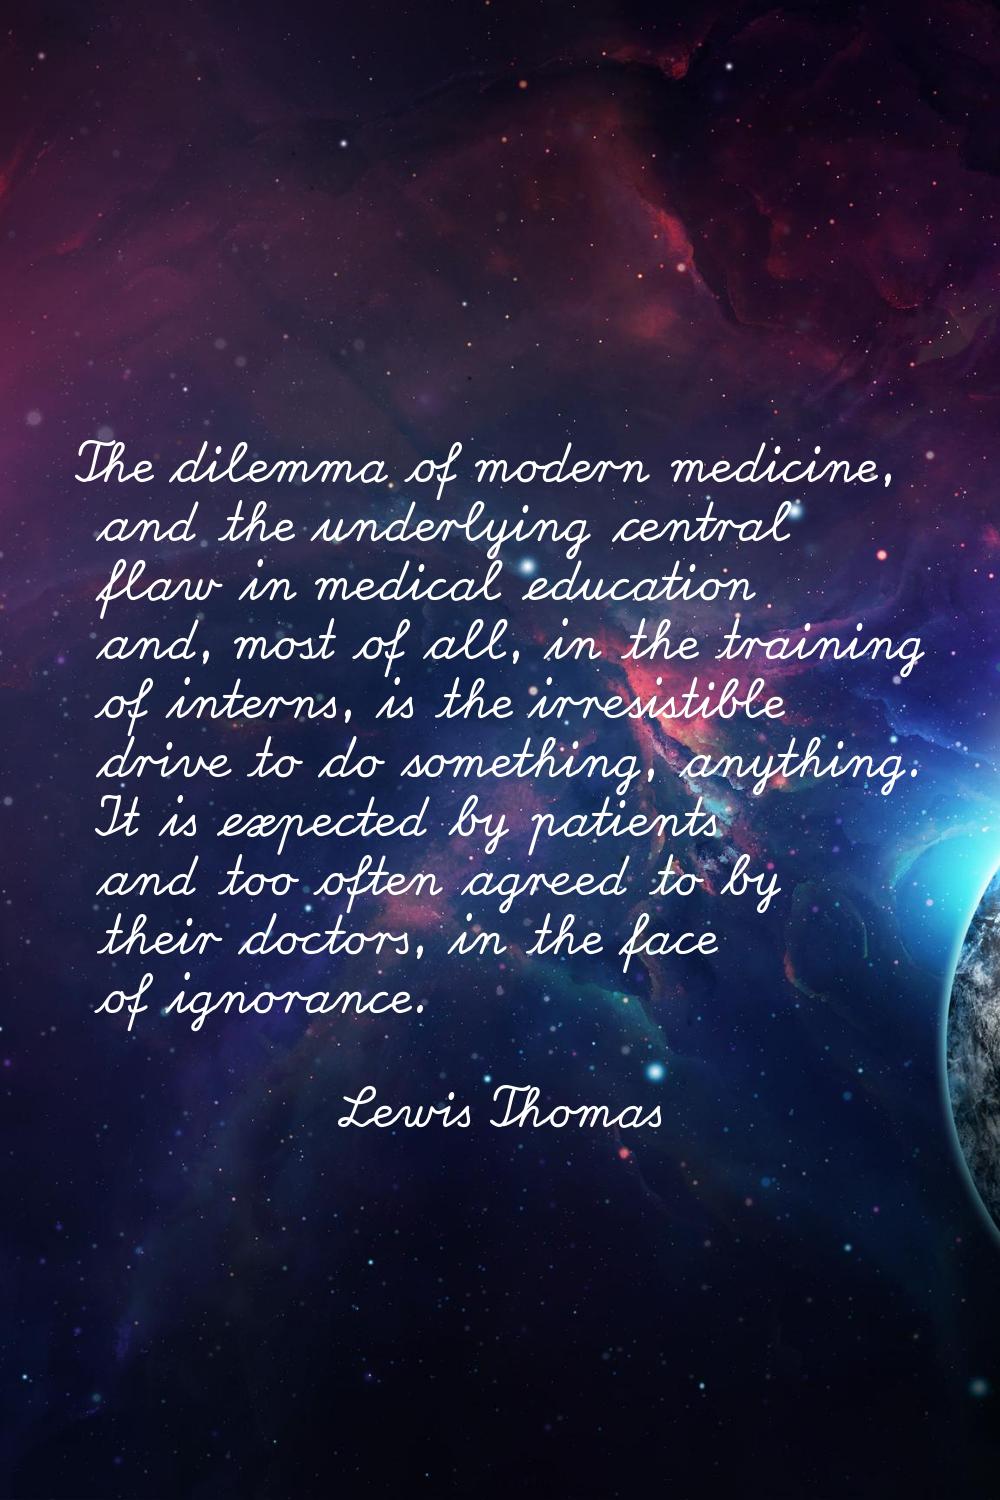 The dilemma of modern medicine, and the underlying central flaw in medical education and, most of a